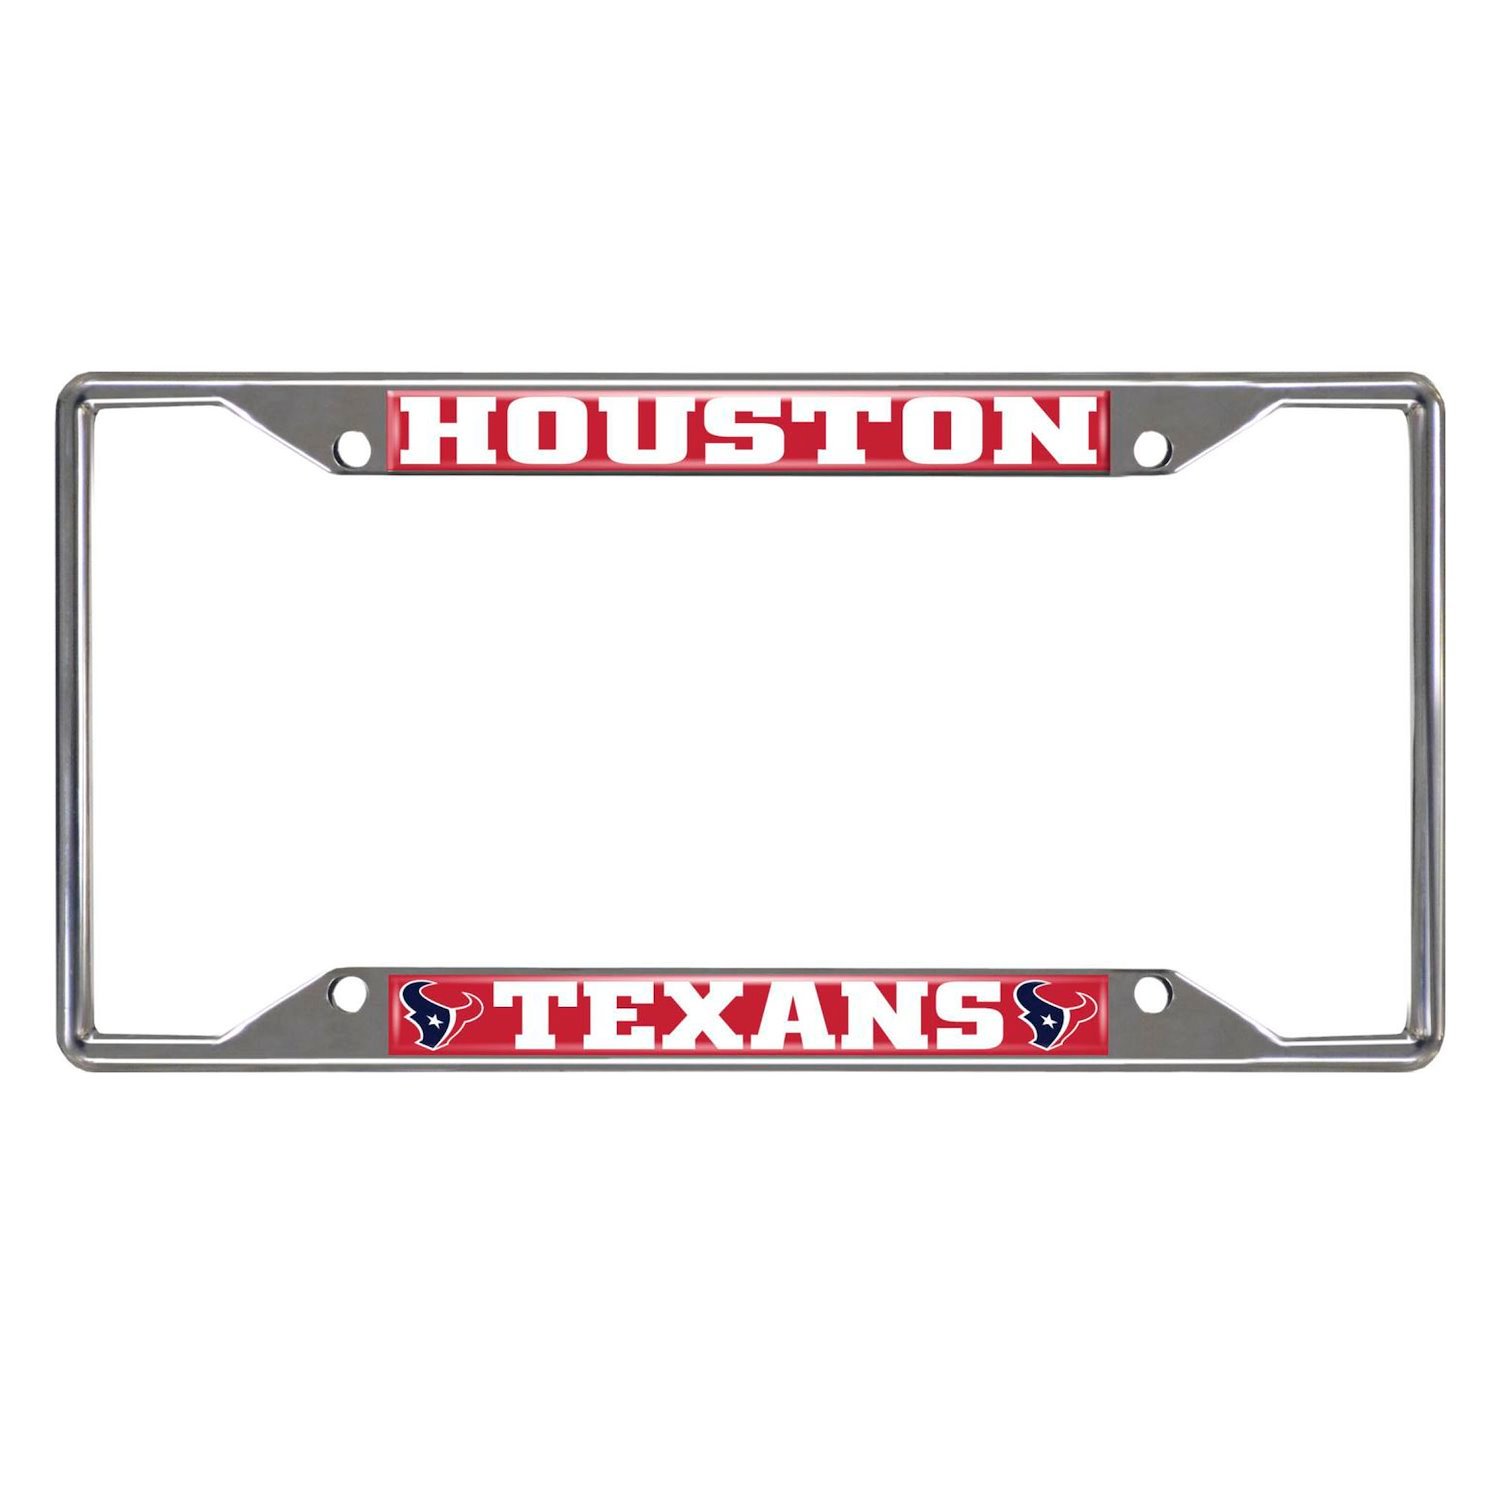 21531 Chrome-Metal License Plate Frame, 6.25 in. x 12.25 in., Houston Texans [Red Logo]